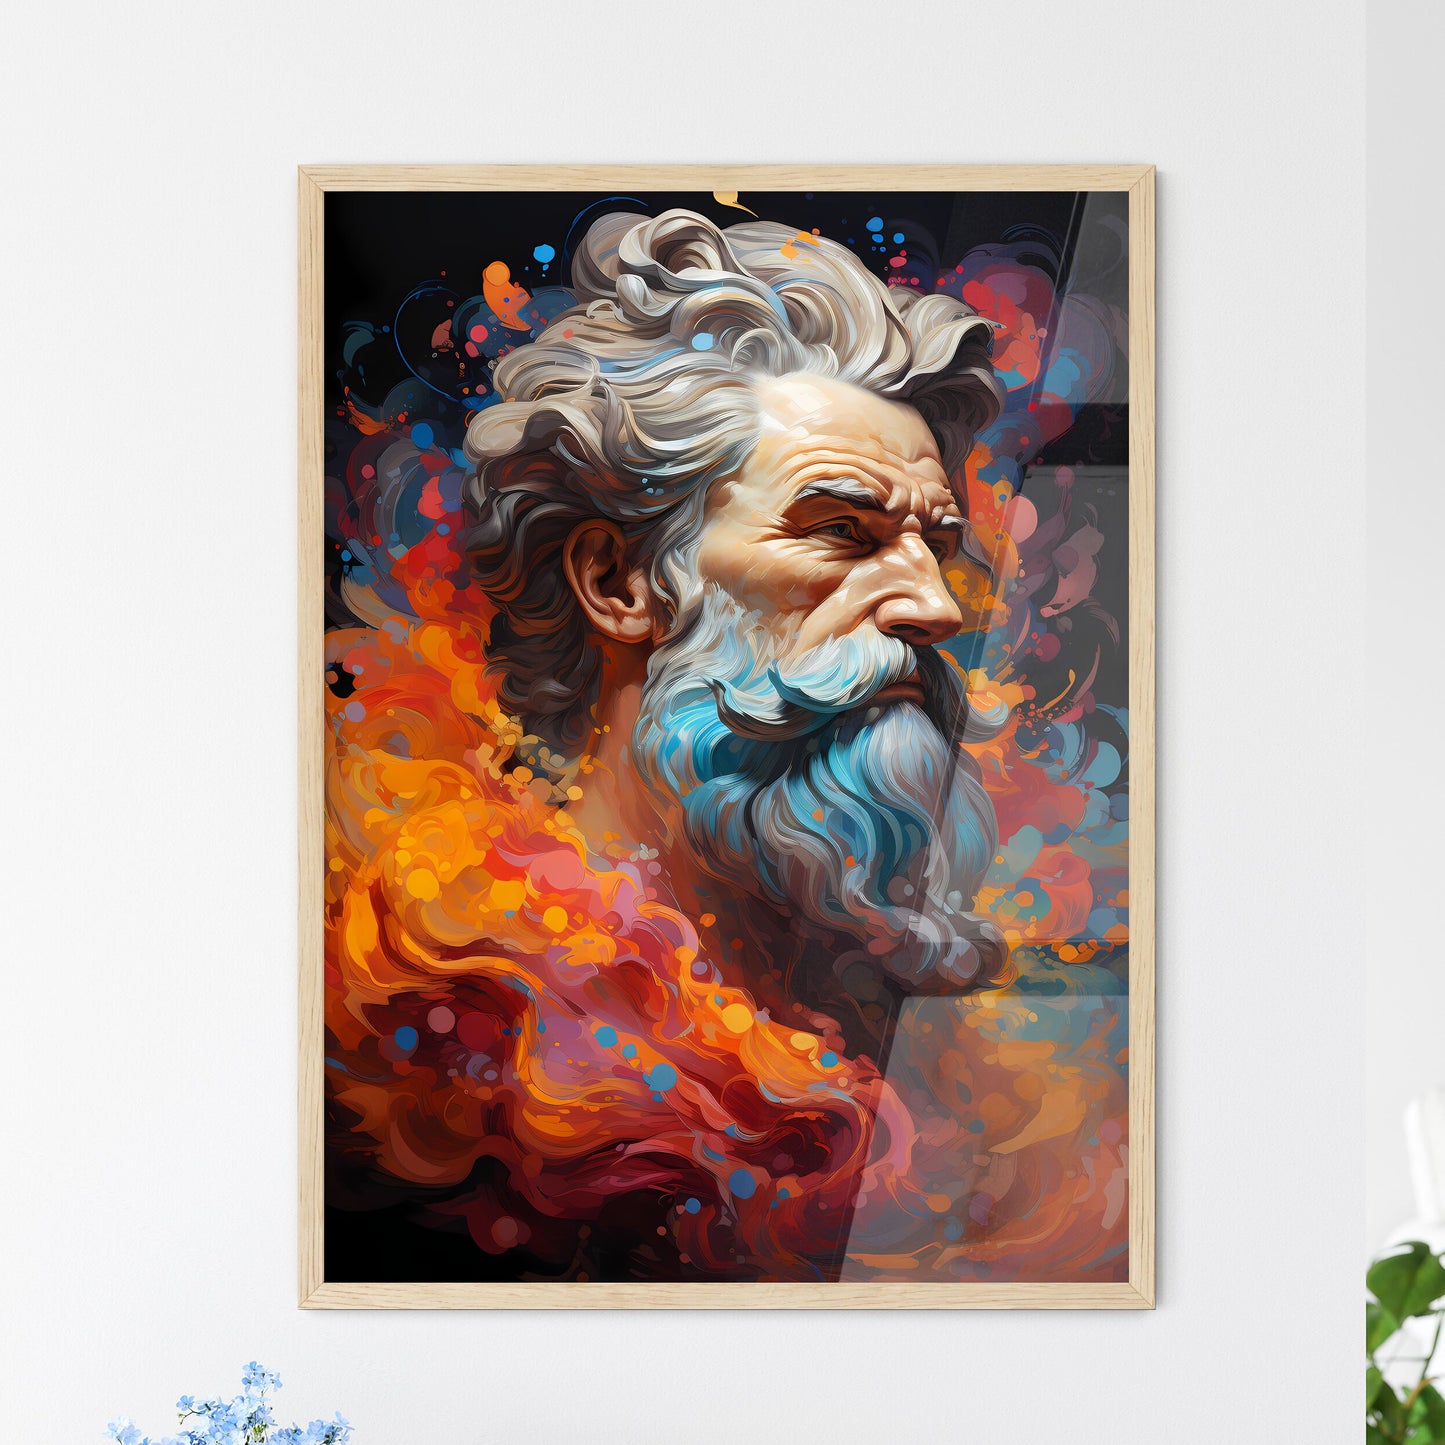 Aristoteles Explains The World - A Painting Of A Man With A Beard Default Title